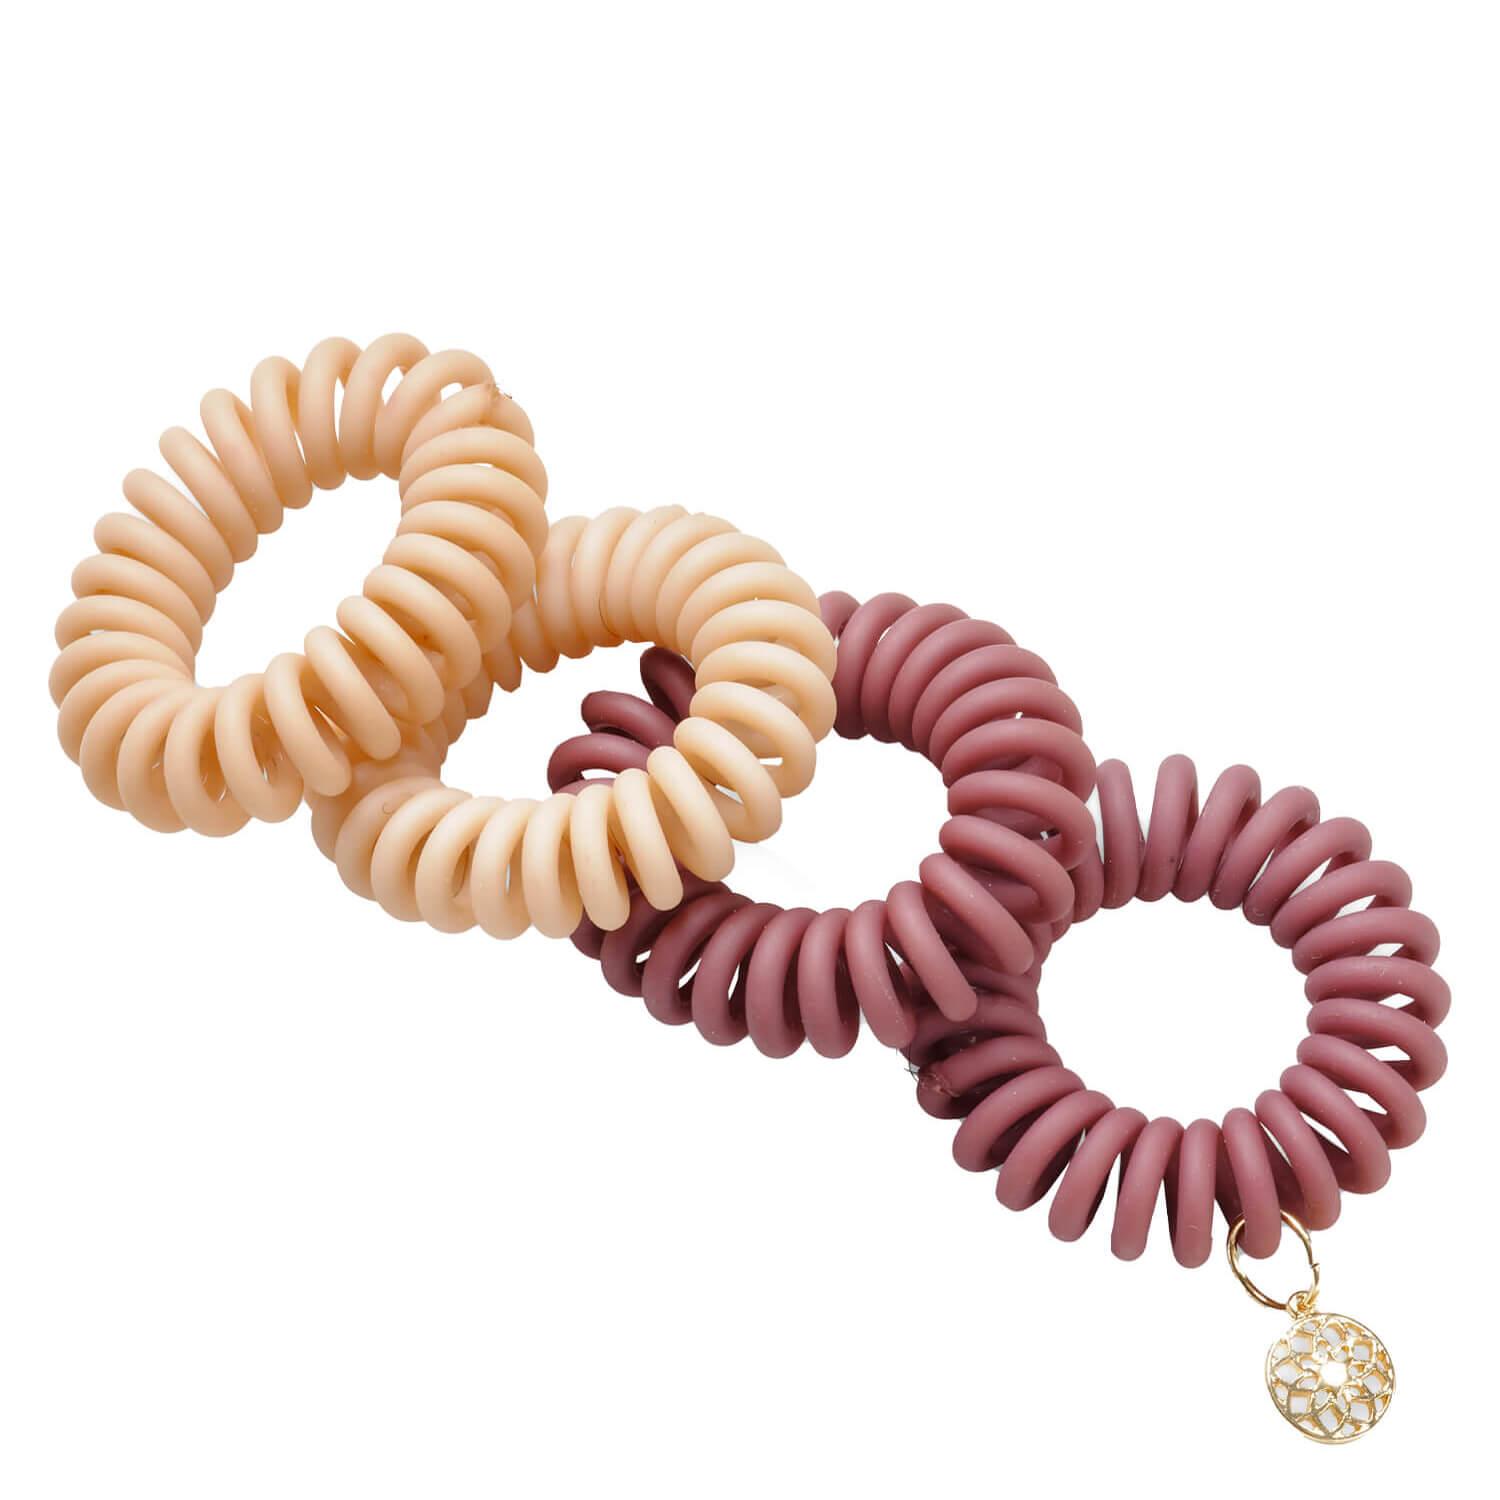 Body Mind and Soul Spiral Hair Band Yoga Nude 4cm